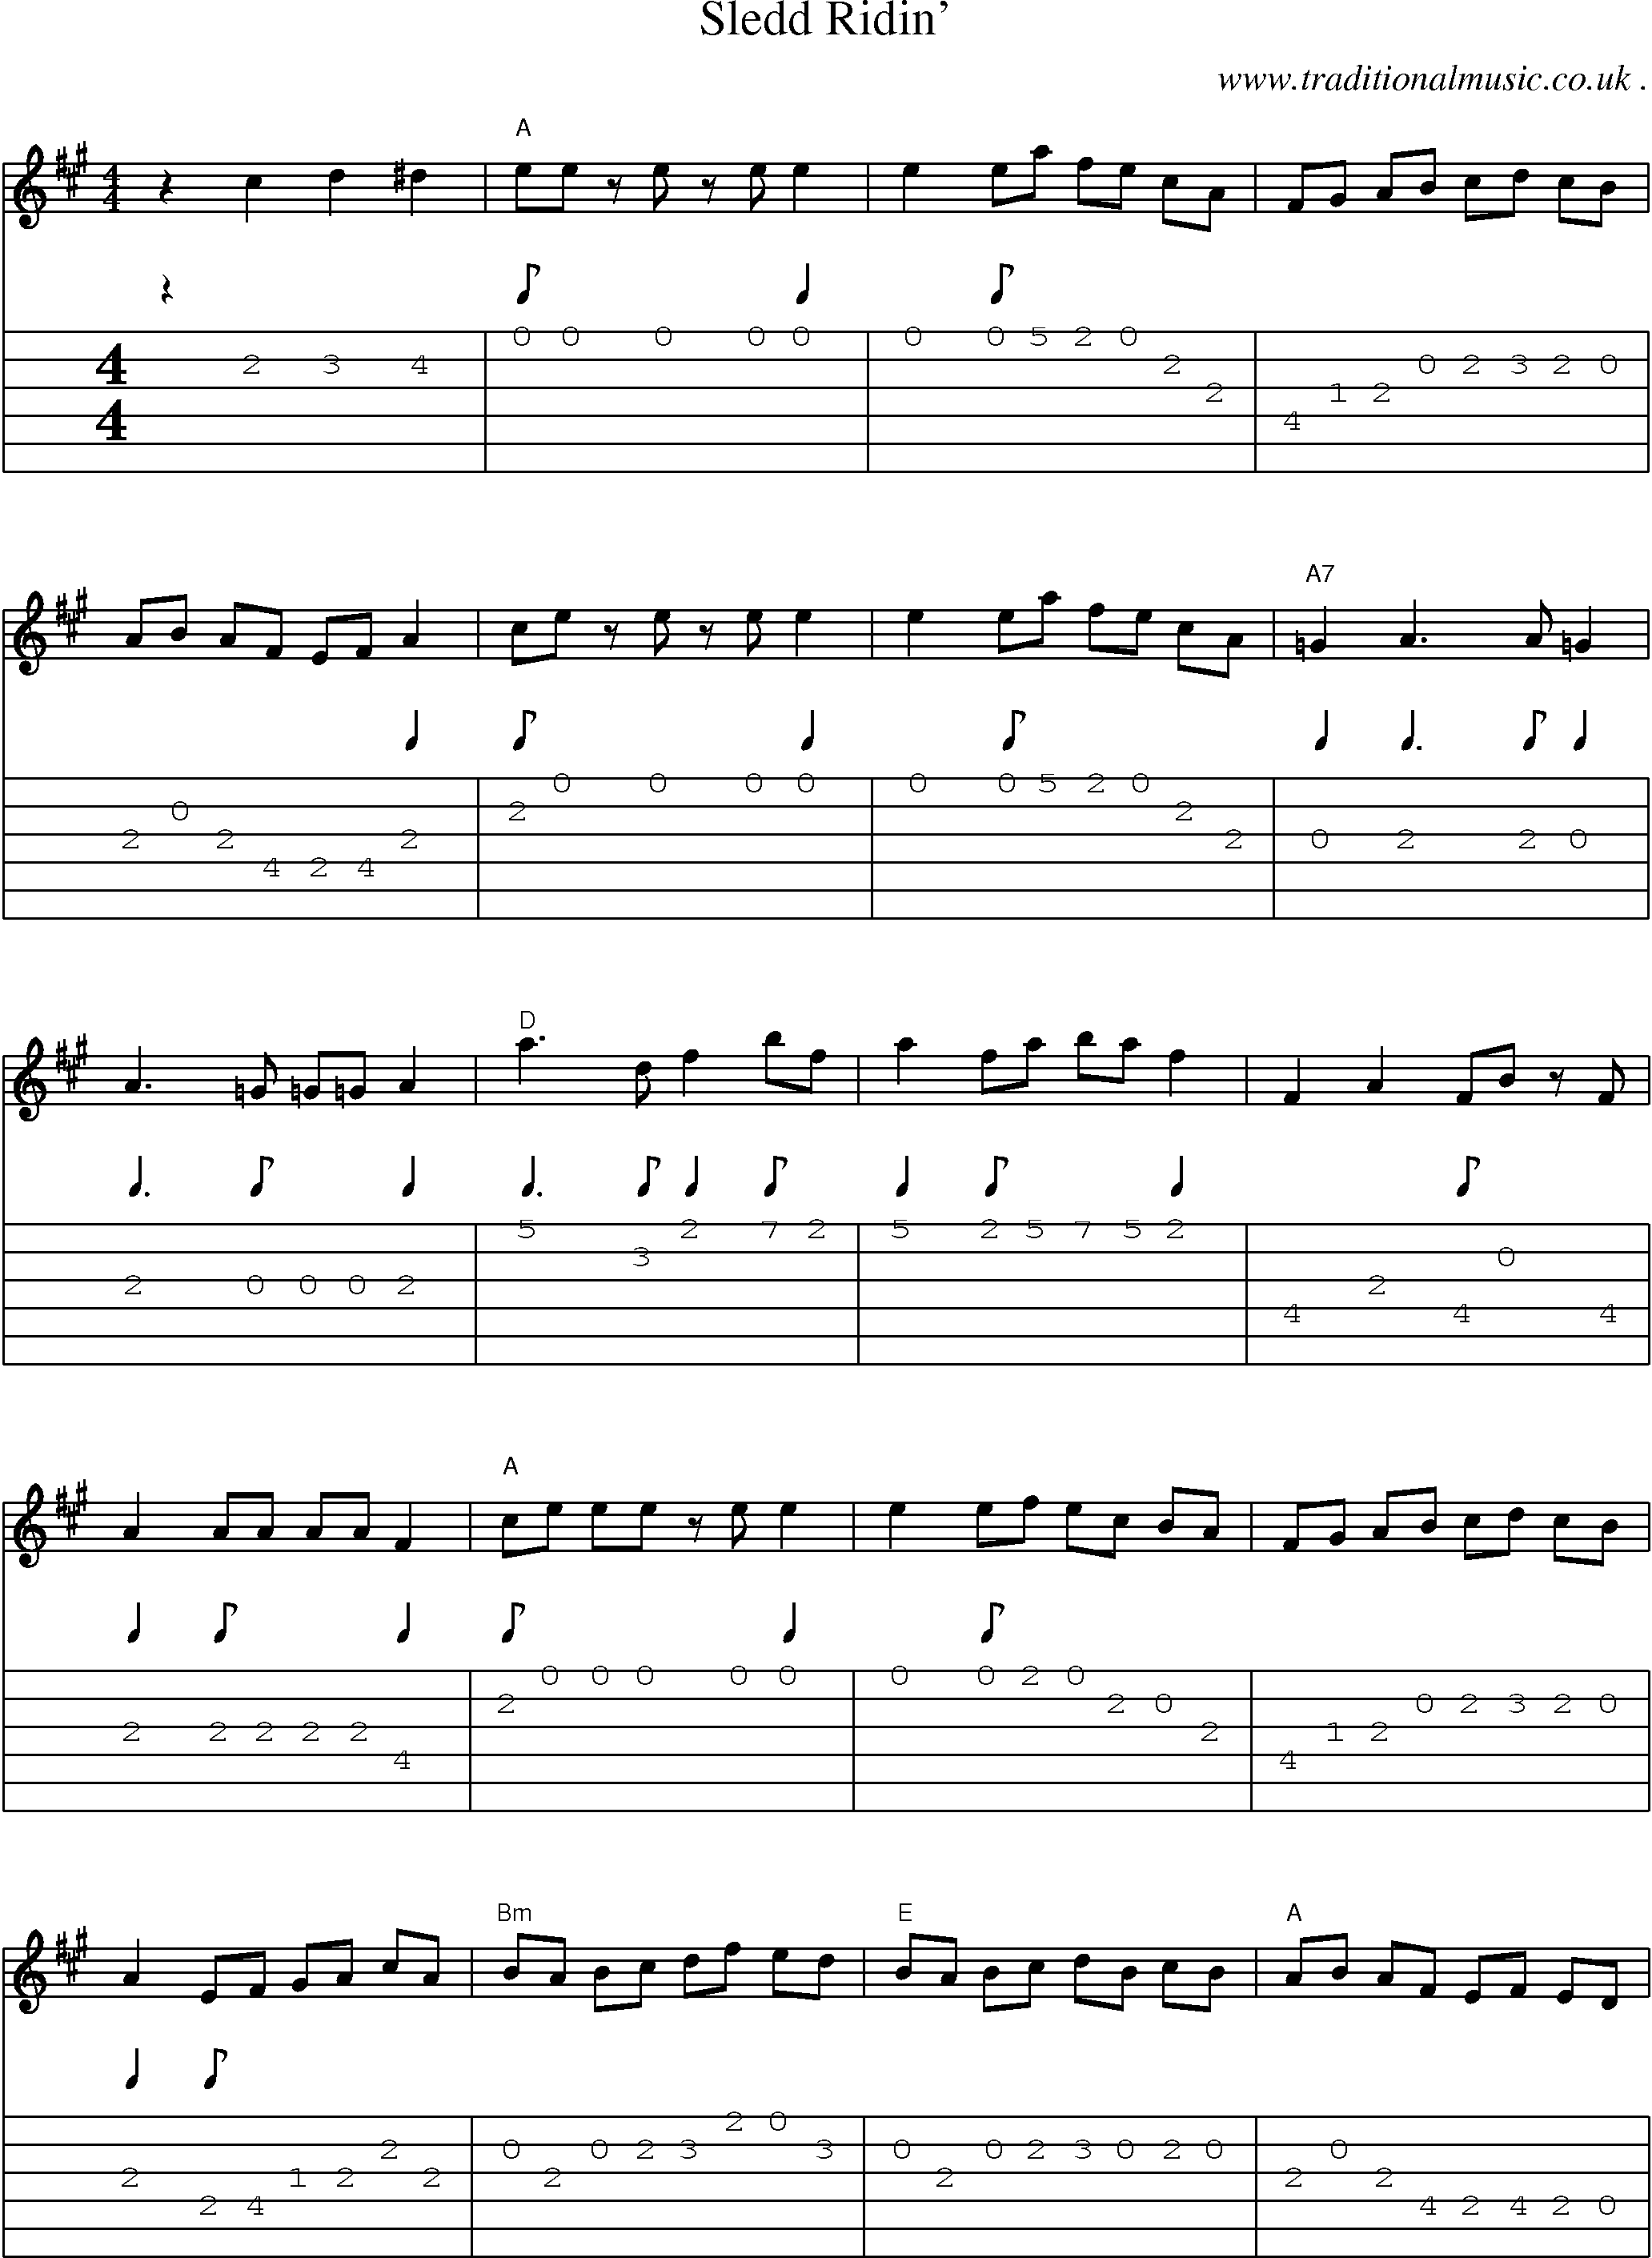 Music Score and Guitar Tabs for Sledd Ridin